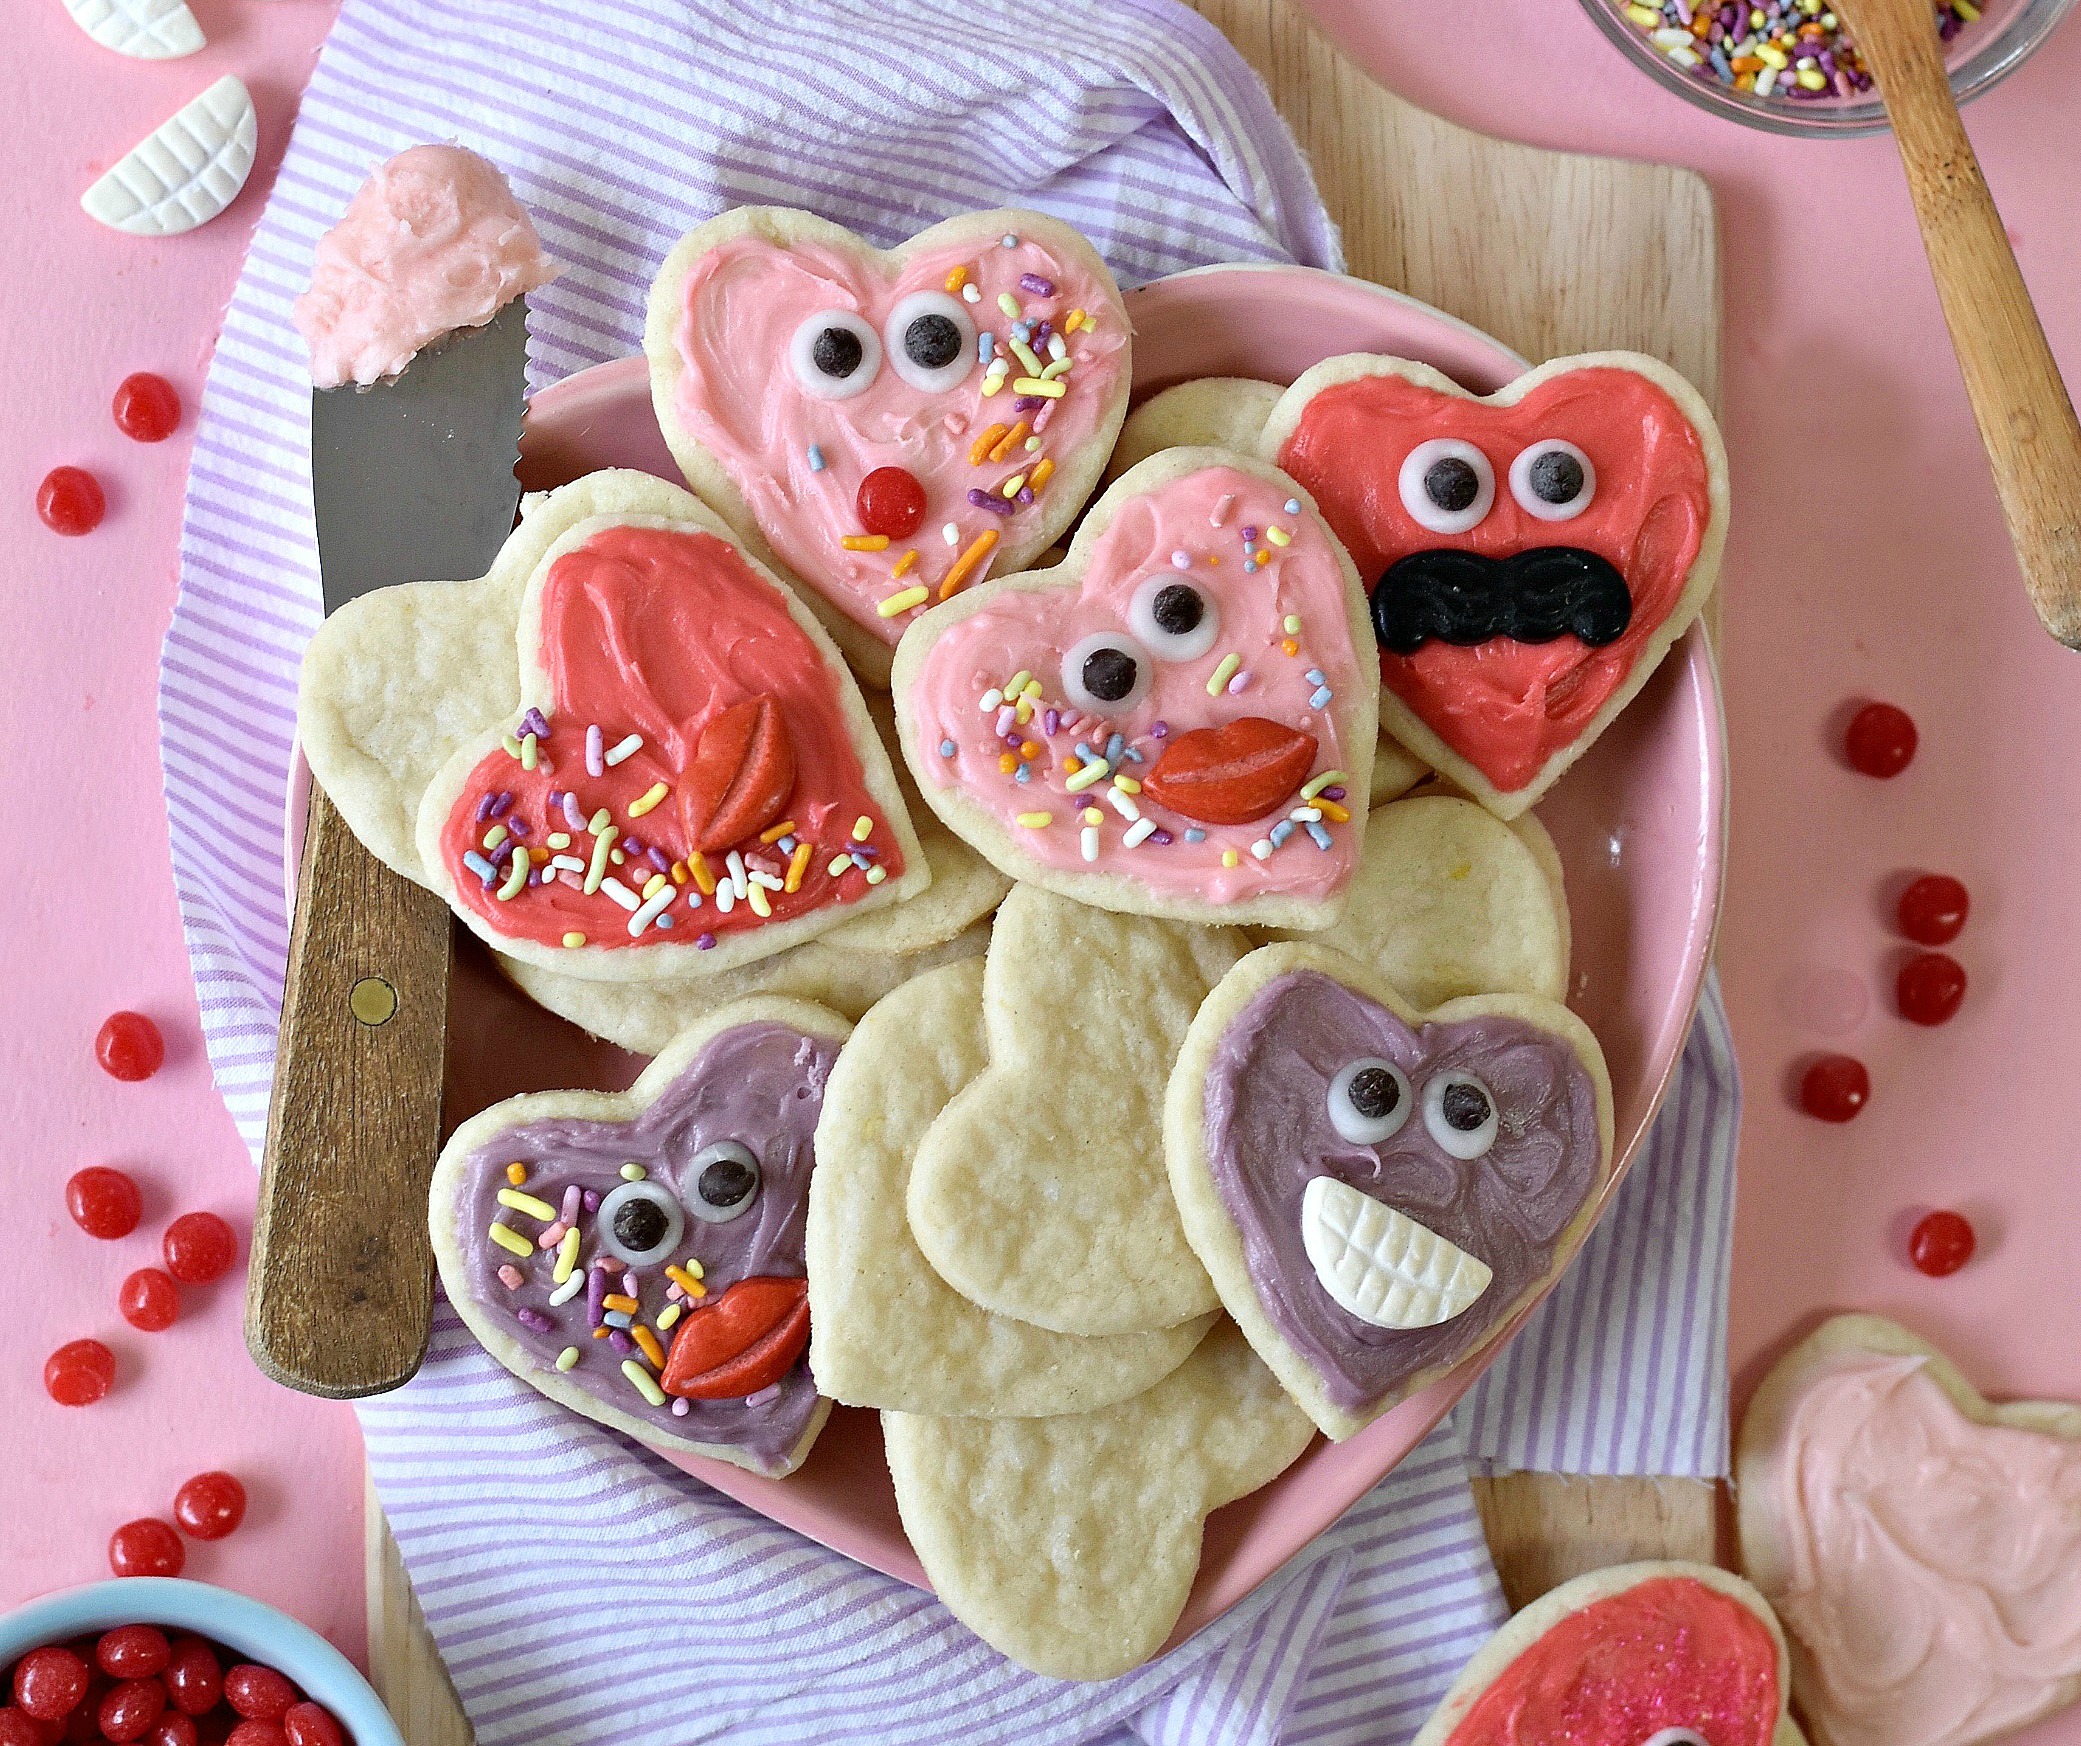 A plate full of heart shaped cookies with faces on a pink background.